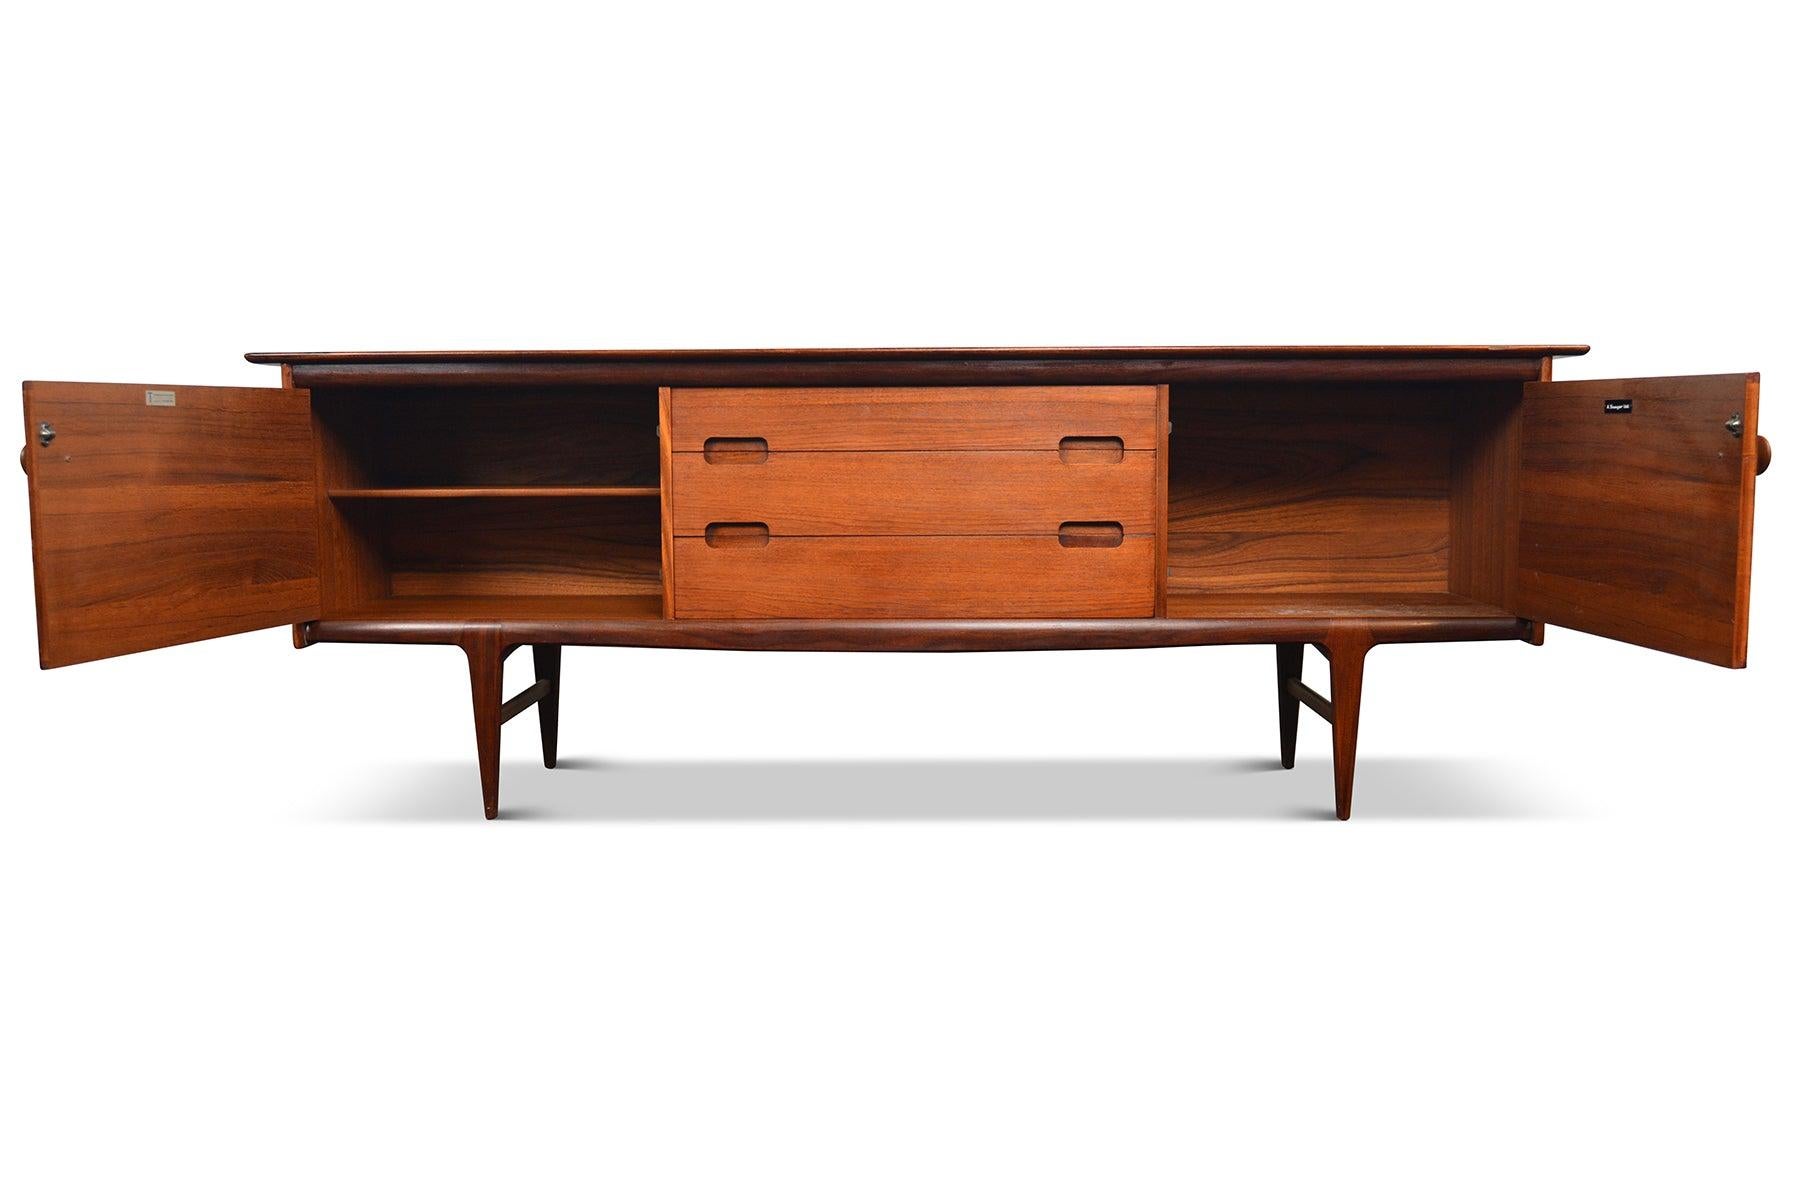 Large Teak Credenza by a. Younger Ltd #2 In Excellent Condition In Berkeley, CA